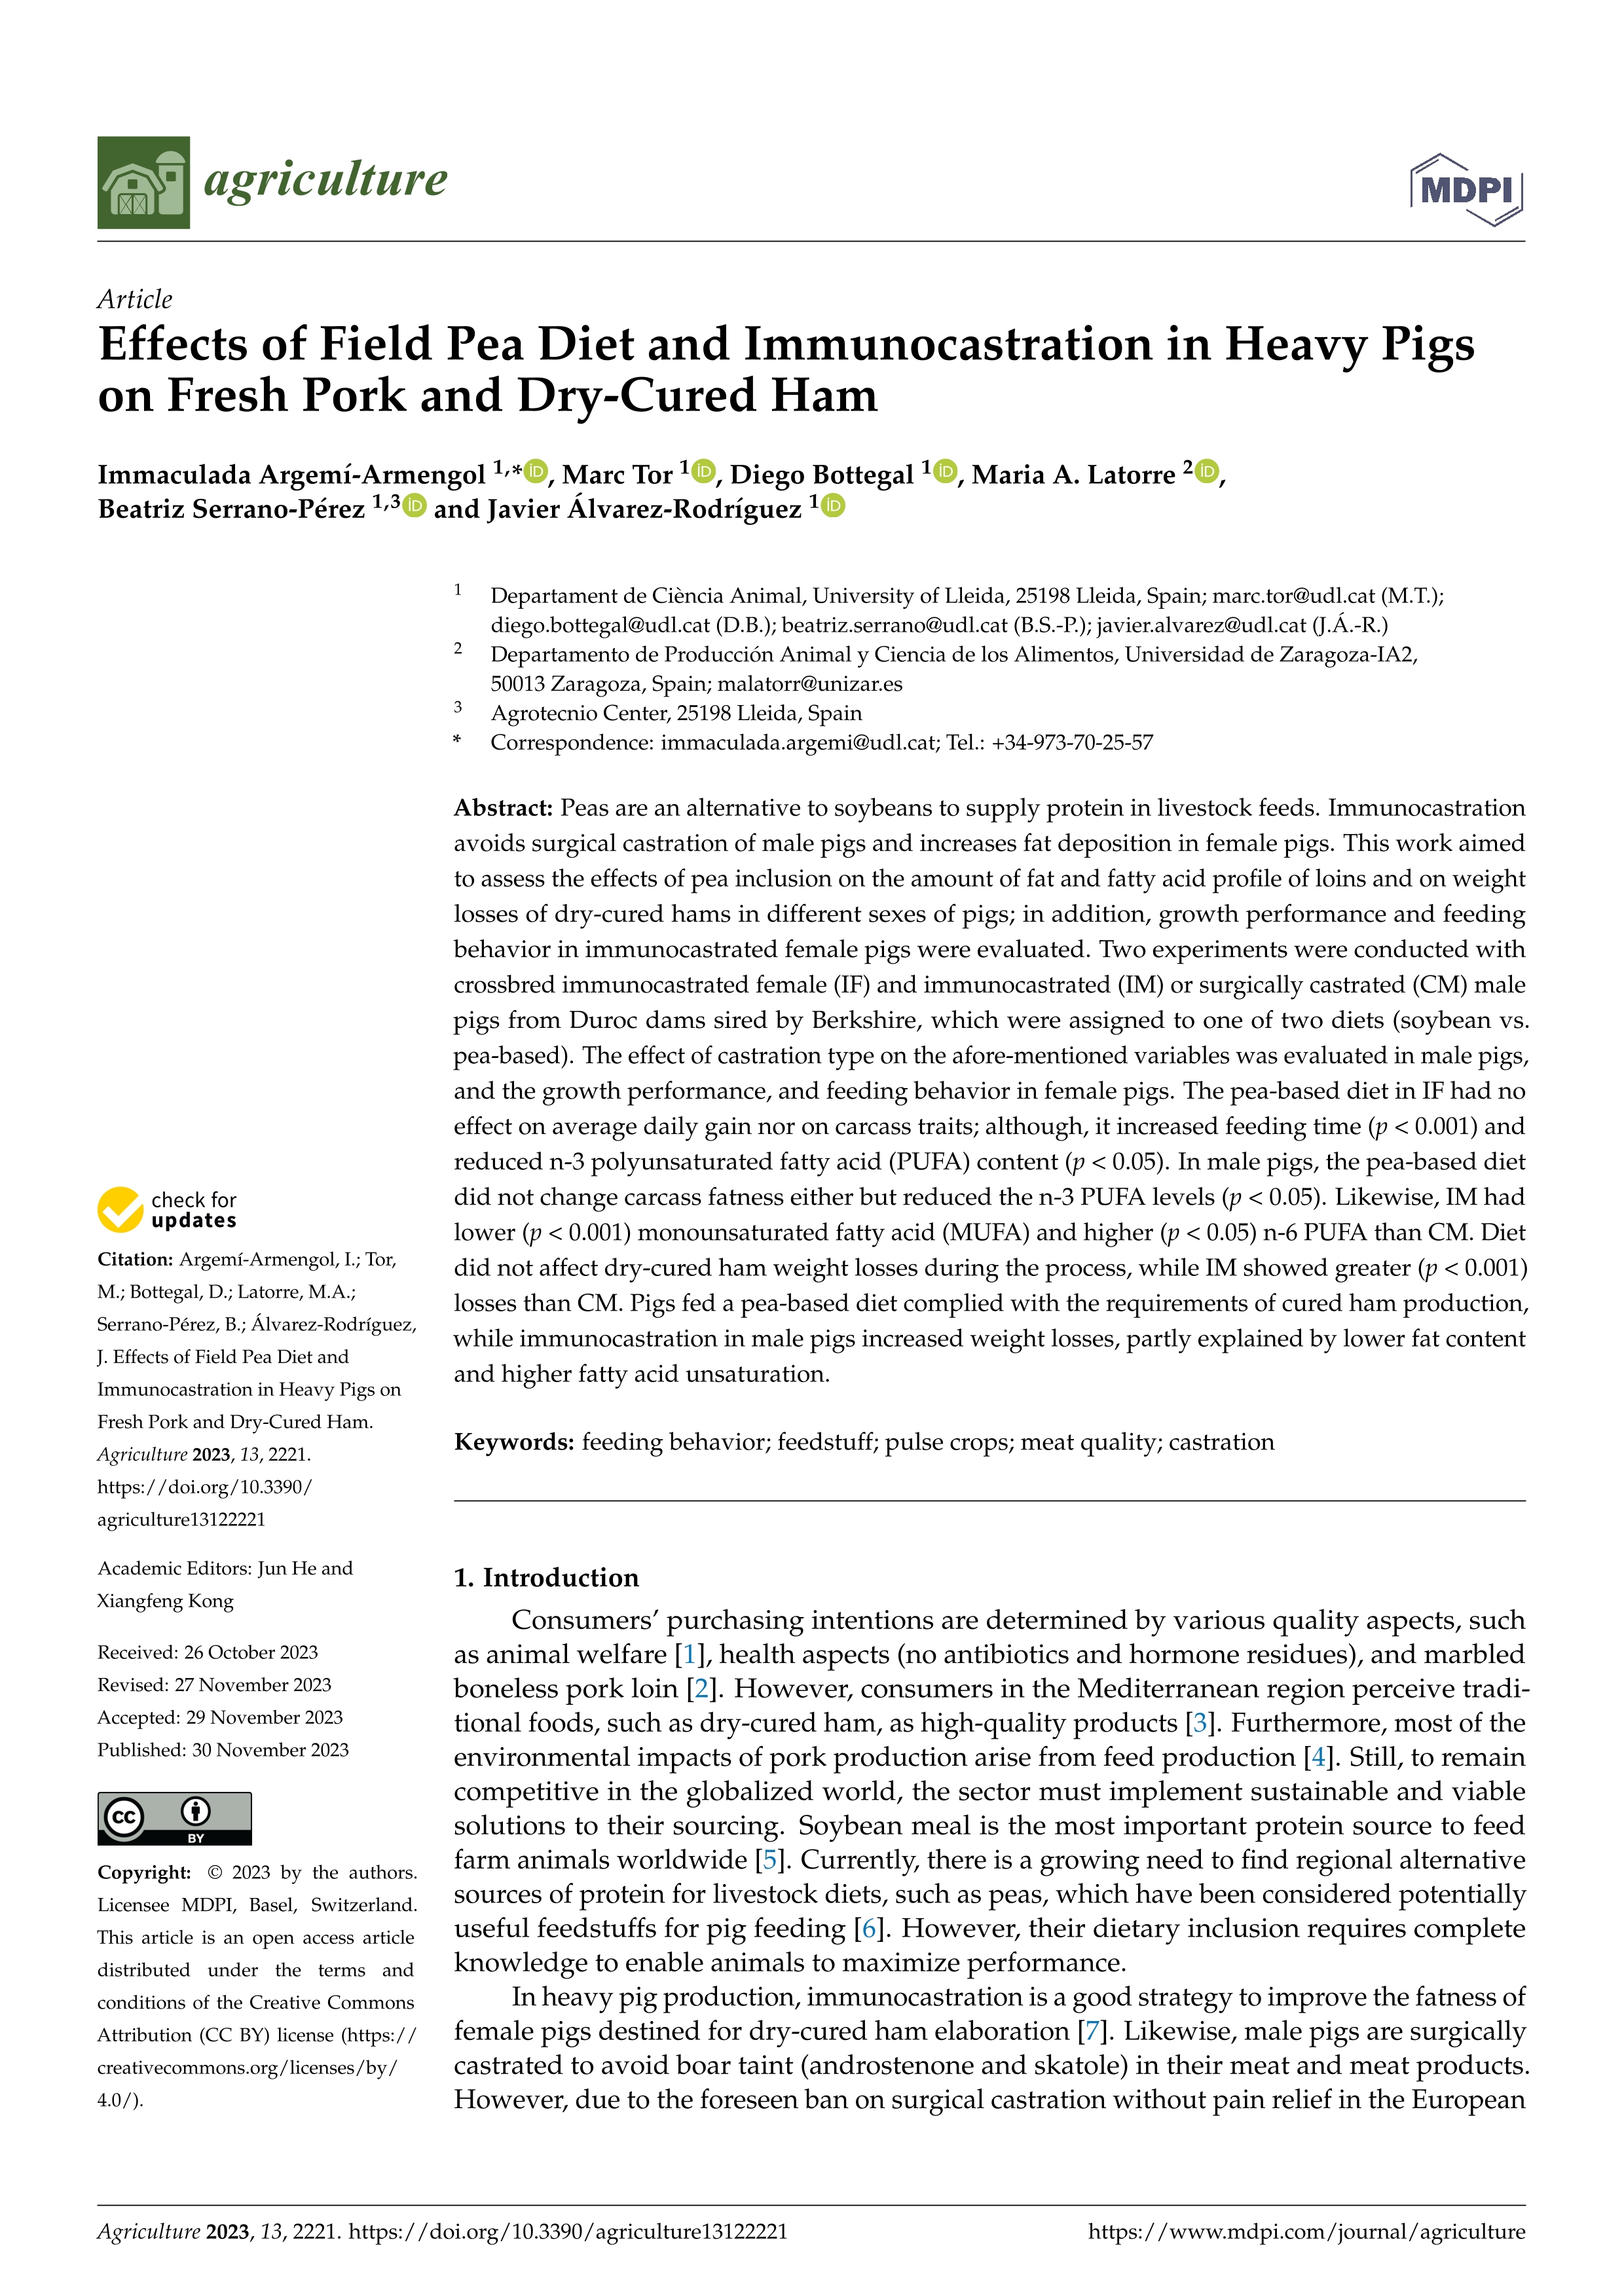 Effects of Field Pea Diet and Immunocastration in Heavy Pigs on Fresh Pork and Dry-Cured Ham